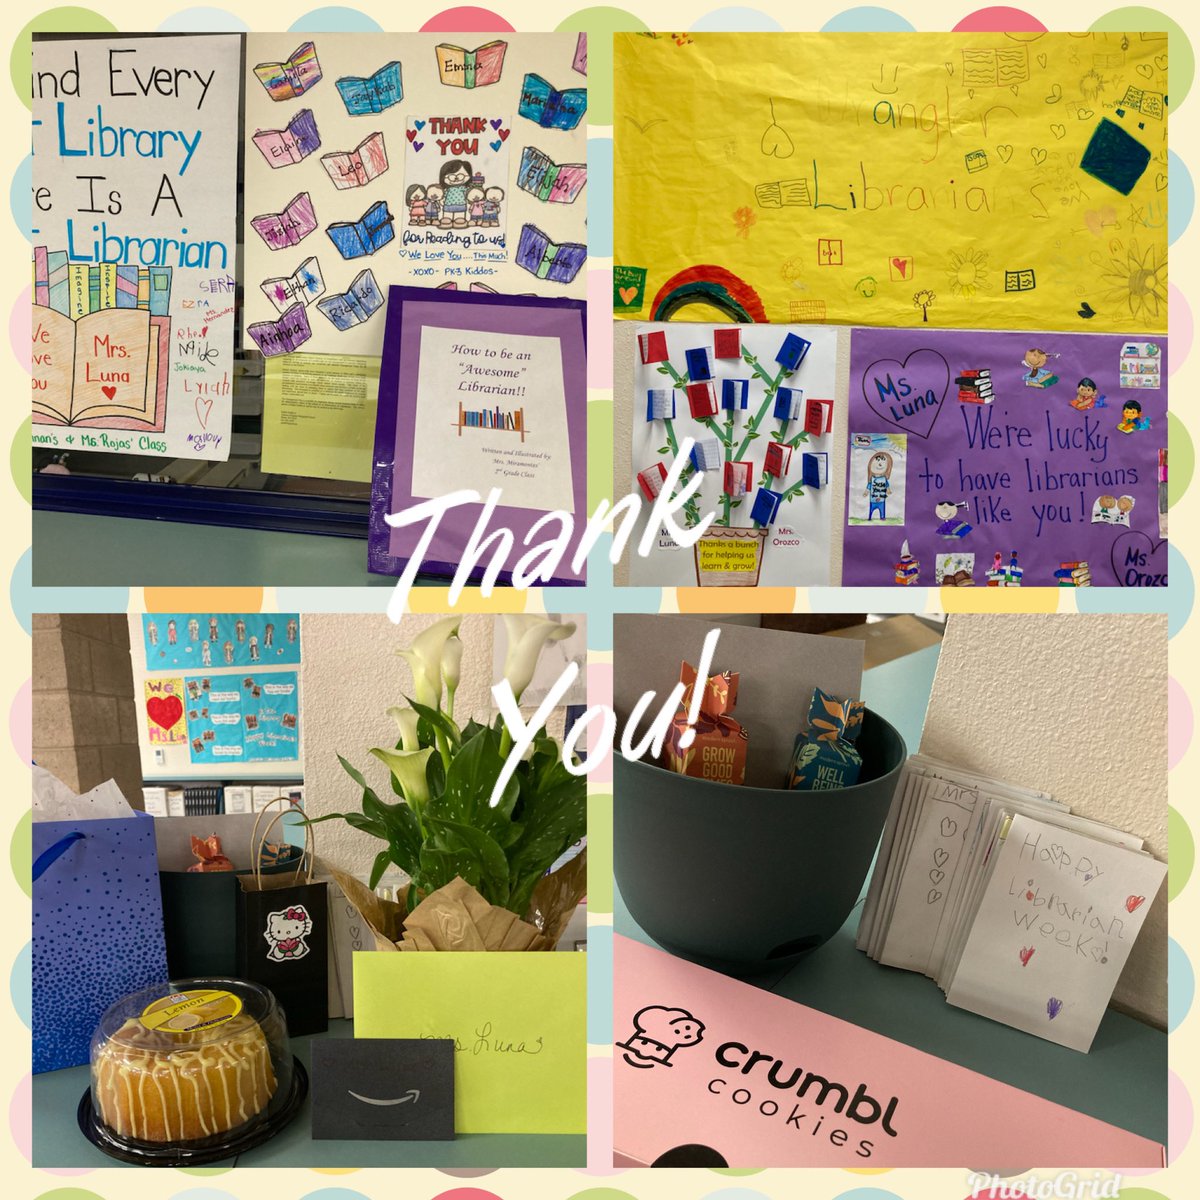 Thank you to my Wrangler Family for your beautiful gifts of appreciation. Ms. Orozco and I love serving our community through the library! Feeling blessed 🥰 @SierraVista_SA #NationalLibraryWeek